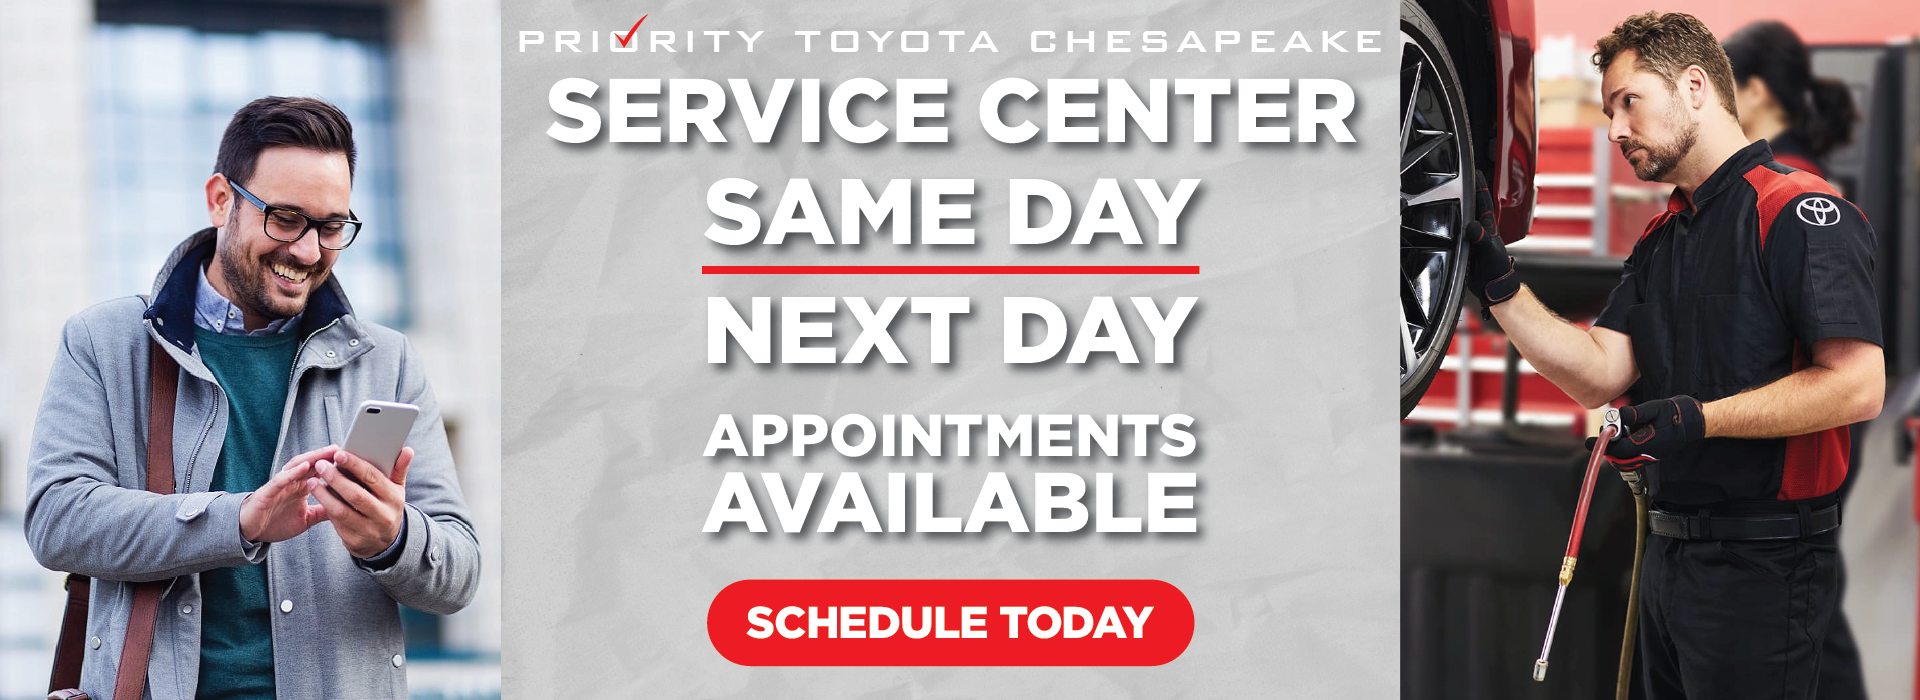 Schedule Your Service Appointment at Priority Toyota